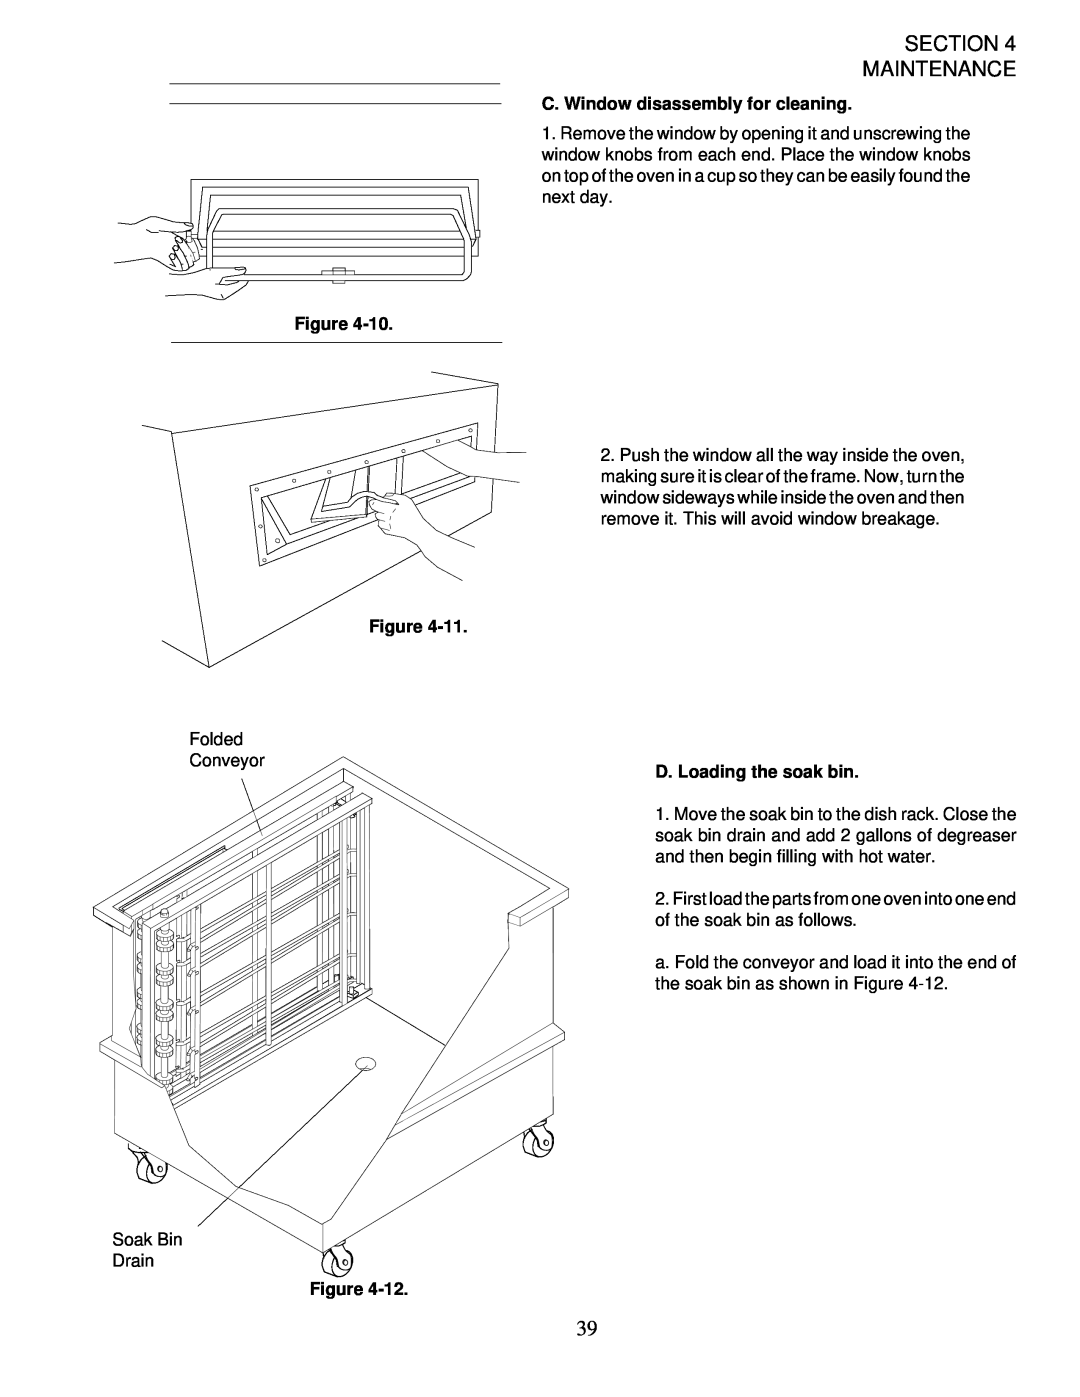 Middleby Marshall PS200-R68 installation manual Section Maintenance, Figure Figure, C. Window disassembly for cleaning 